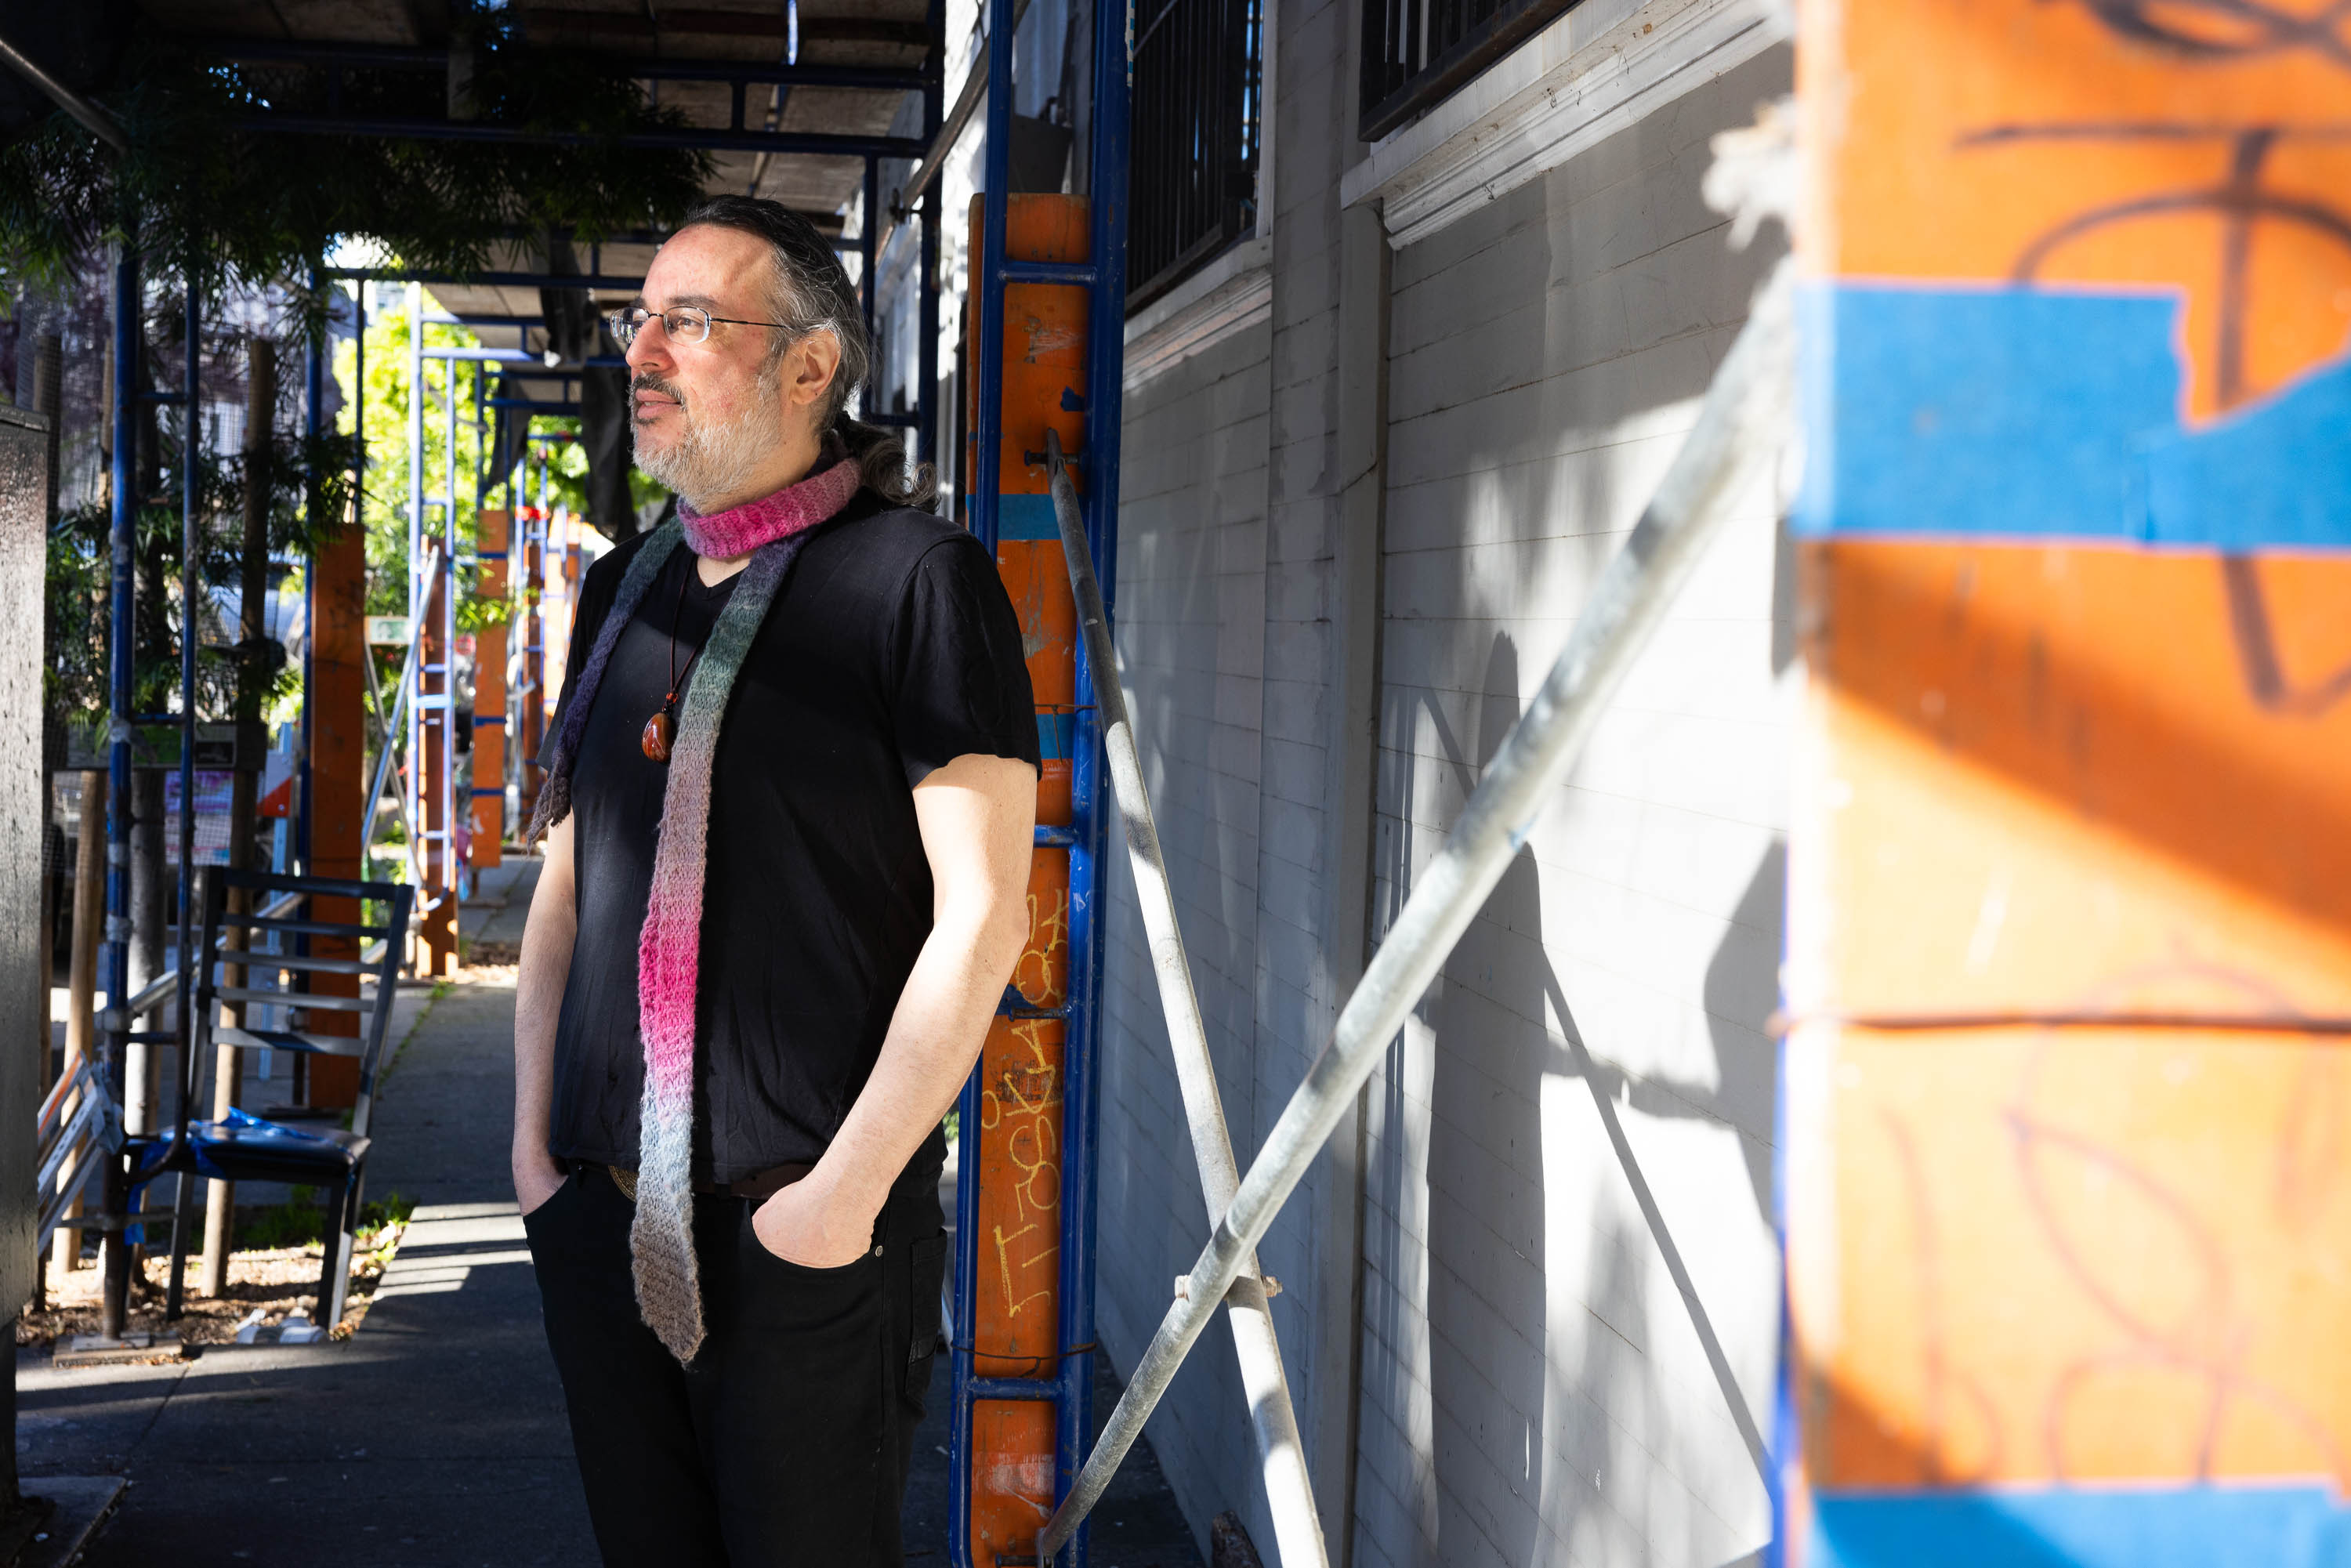 A man stands by a scaffolding in a sunlit alley, wearing a black shirt and pink scarf.